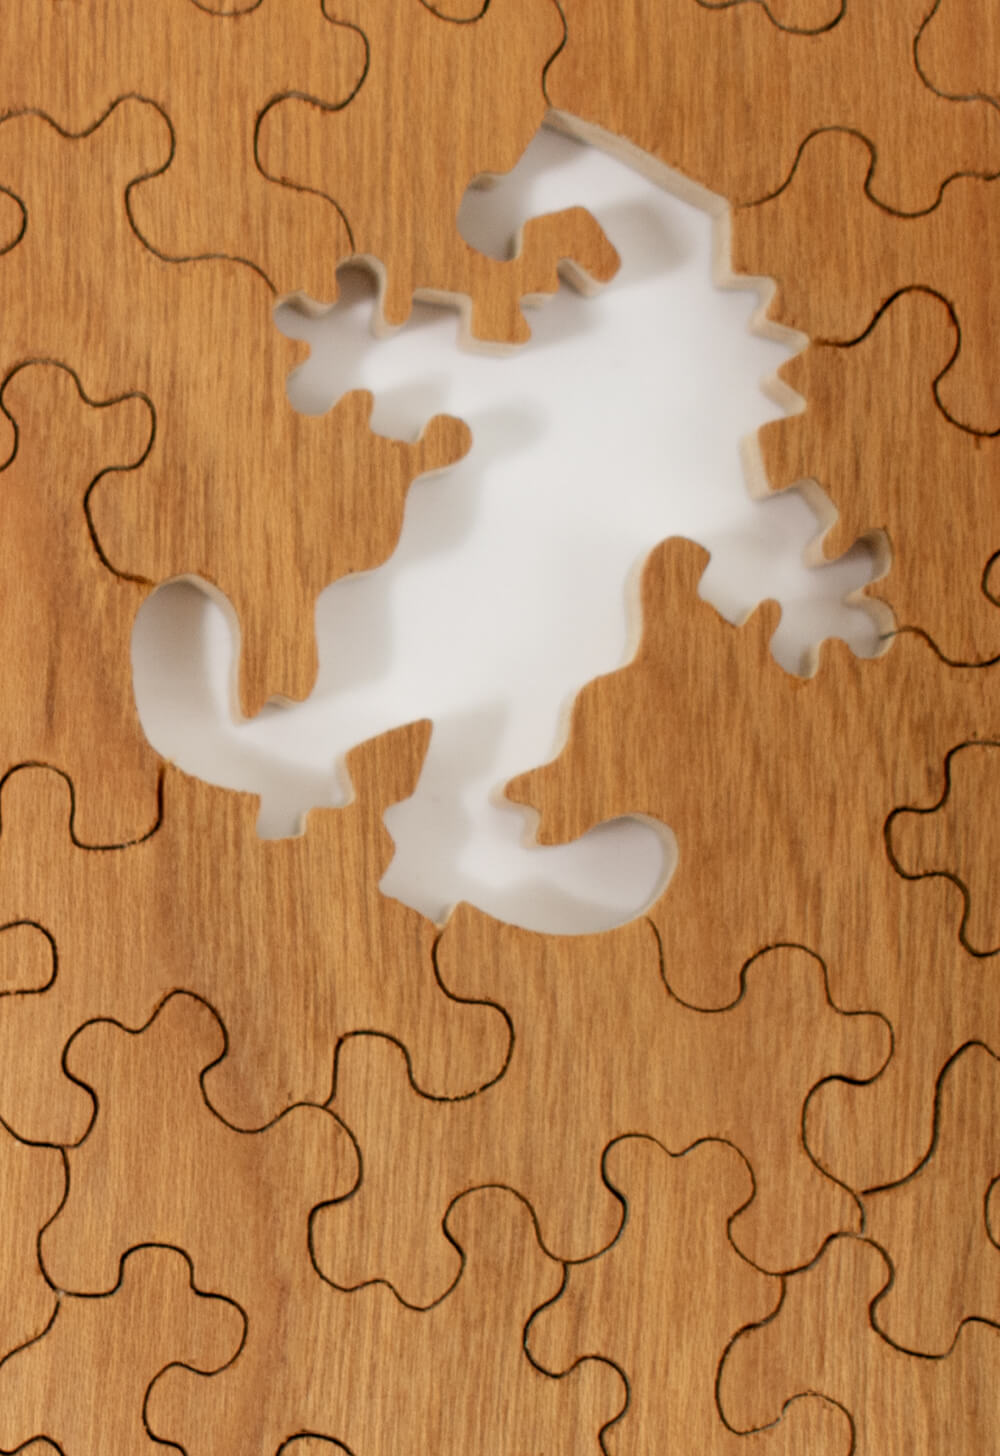 Handmade Wooden Jigsaw Puzzles from Stave Puzzles